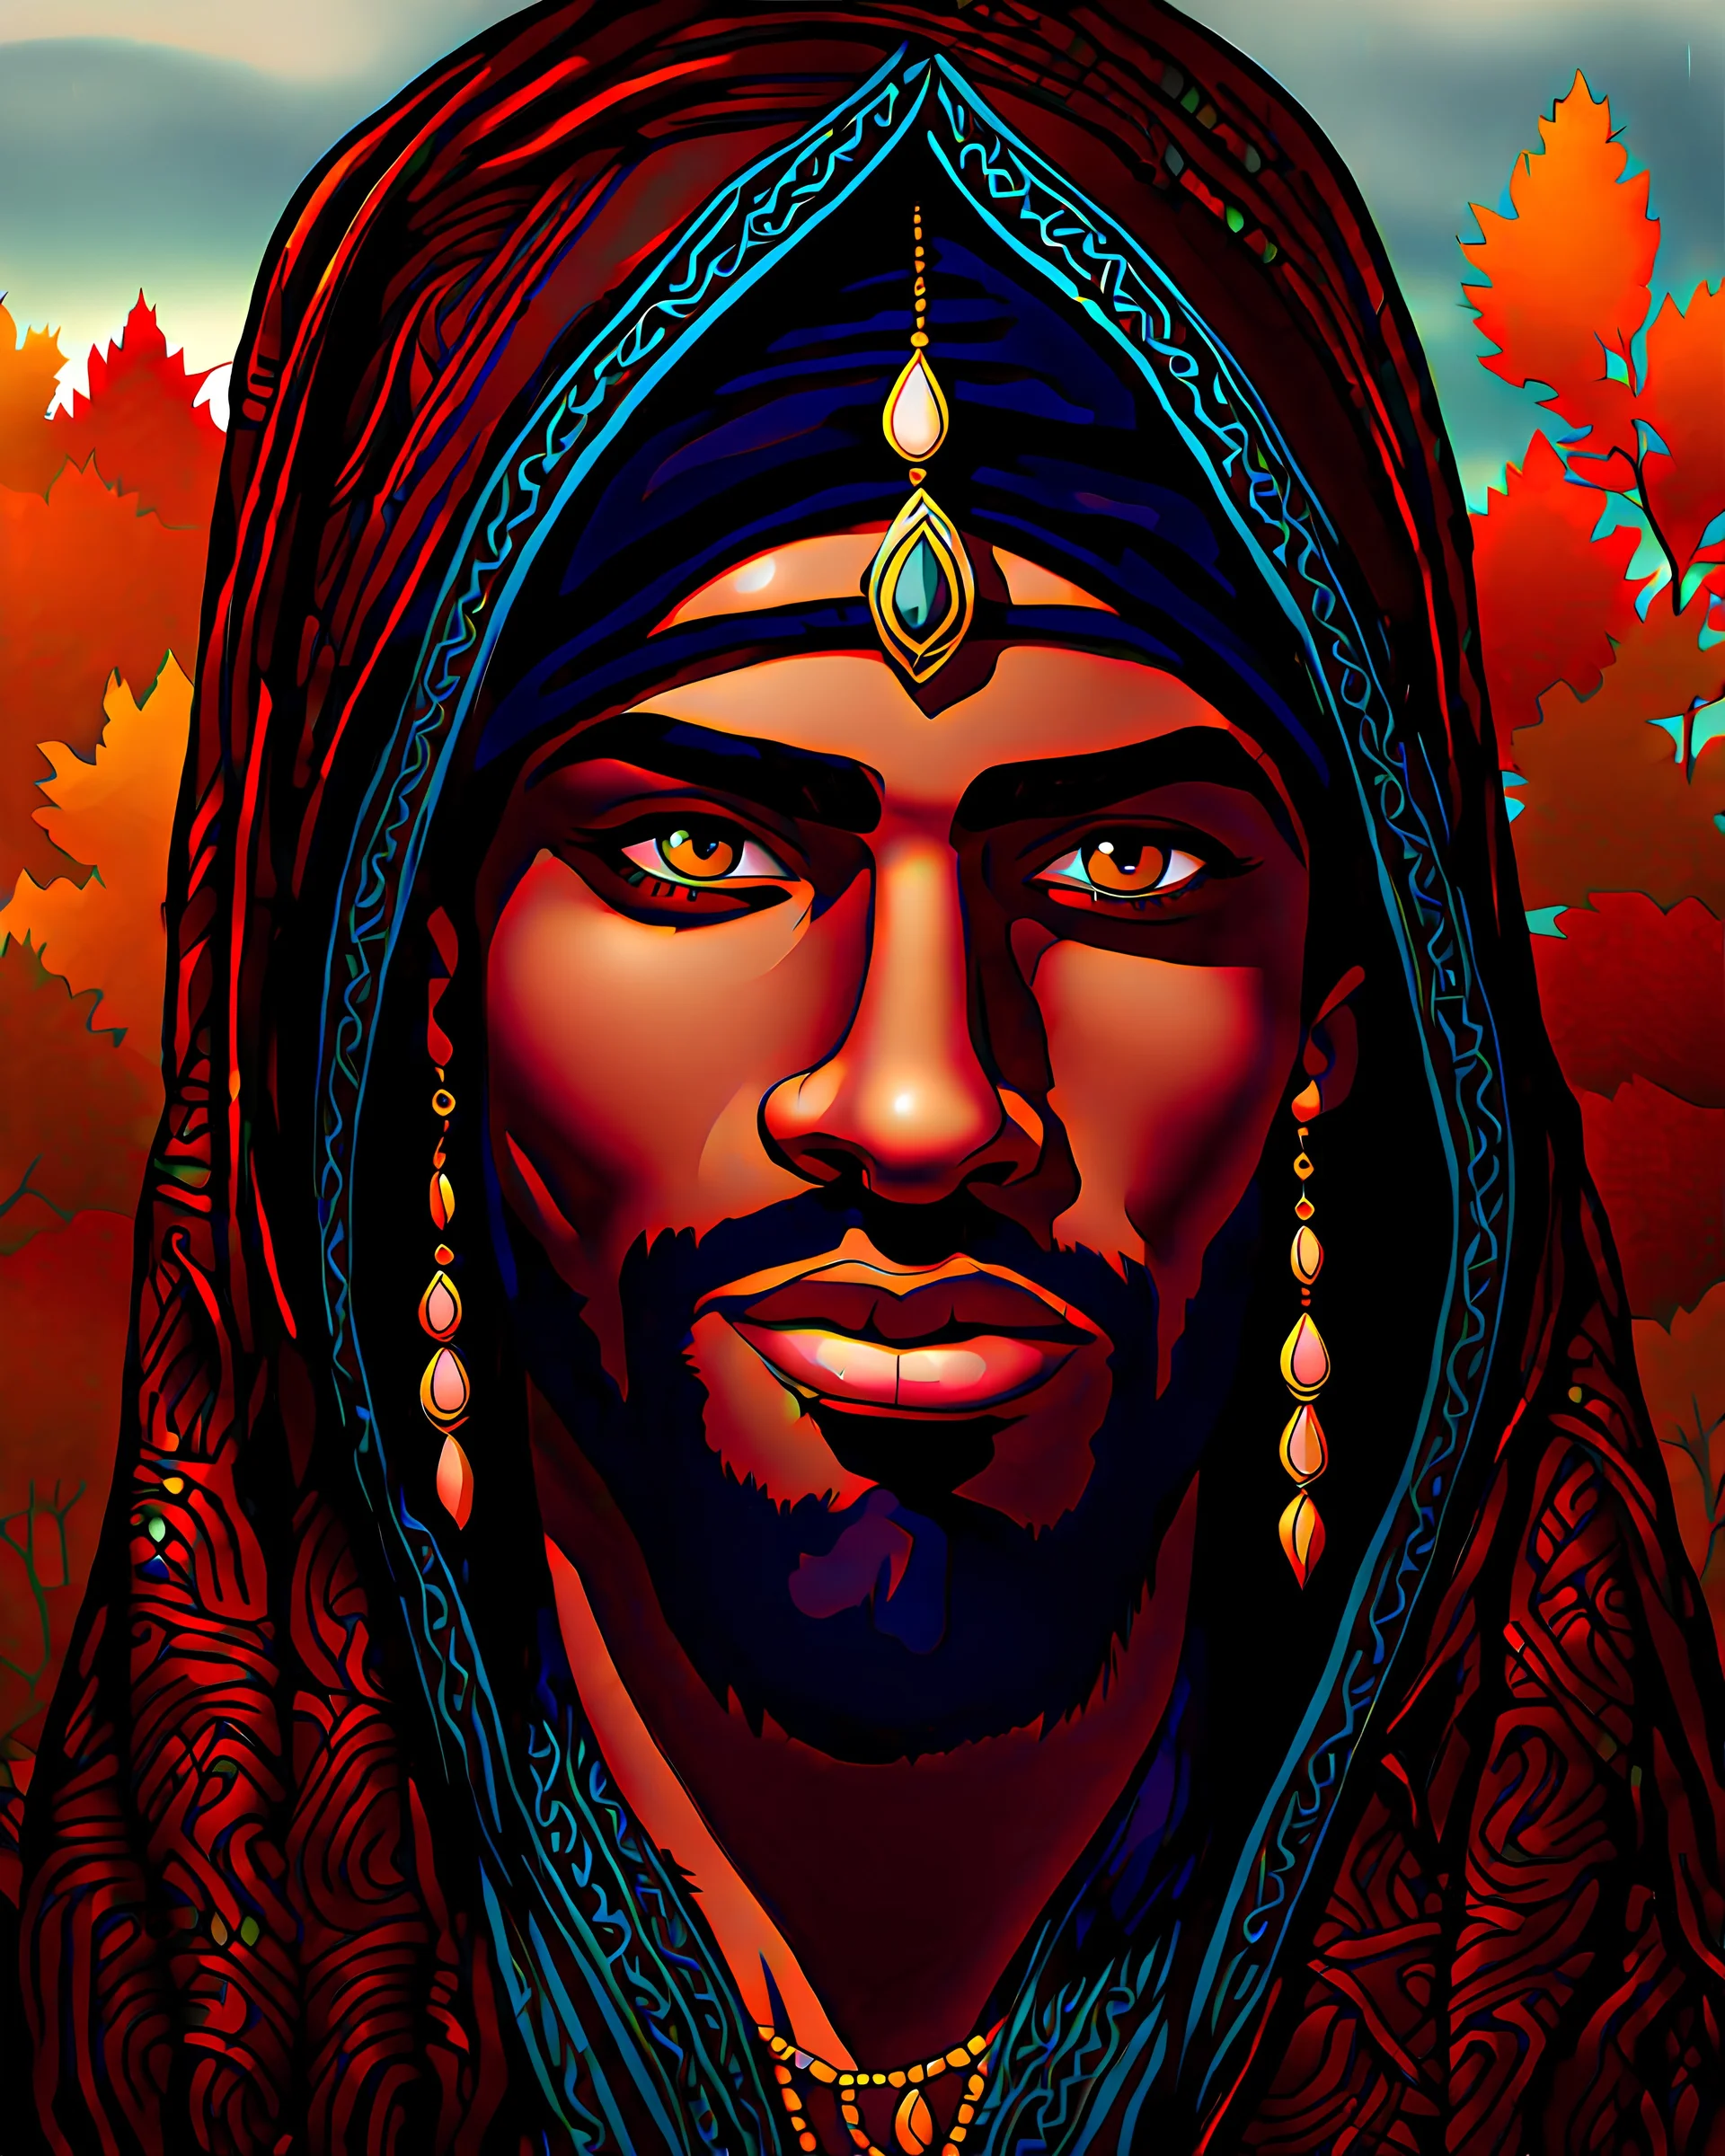 The face of a dark young man wearing traditional Arab clothing, her eyes kohl-rimmed, autumn background, oil colors, cartoon drawings...